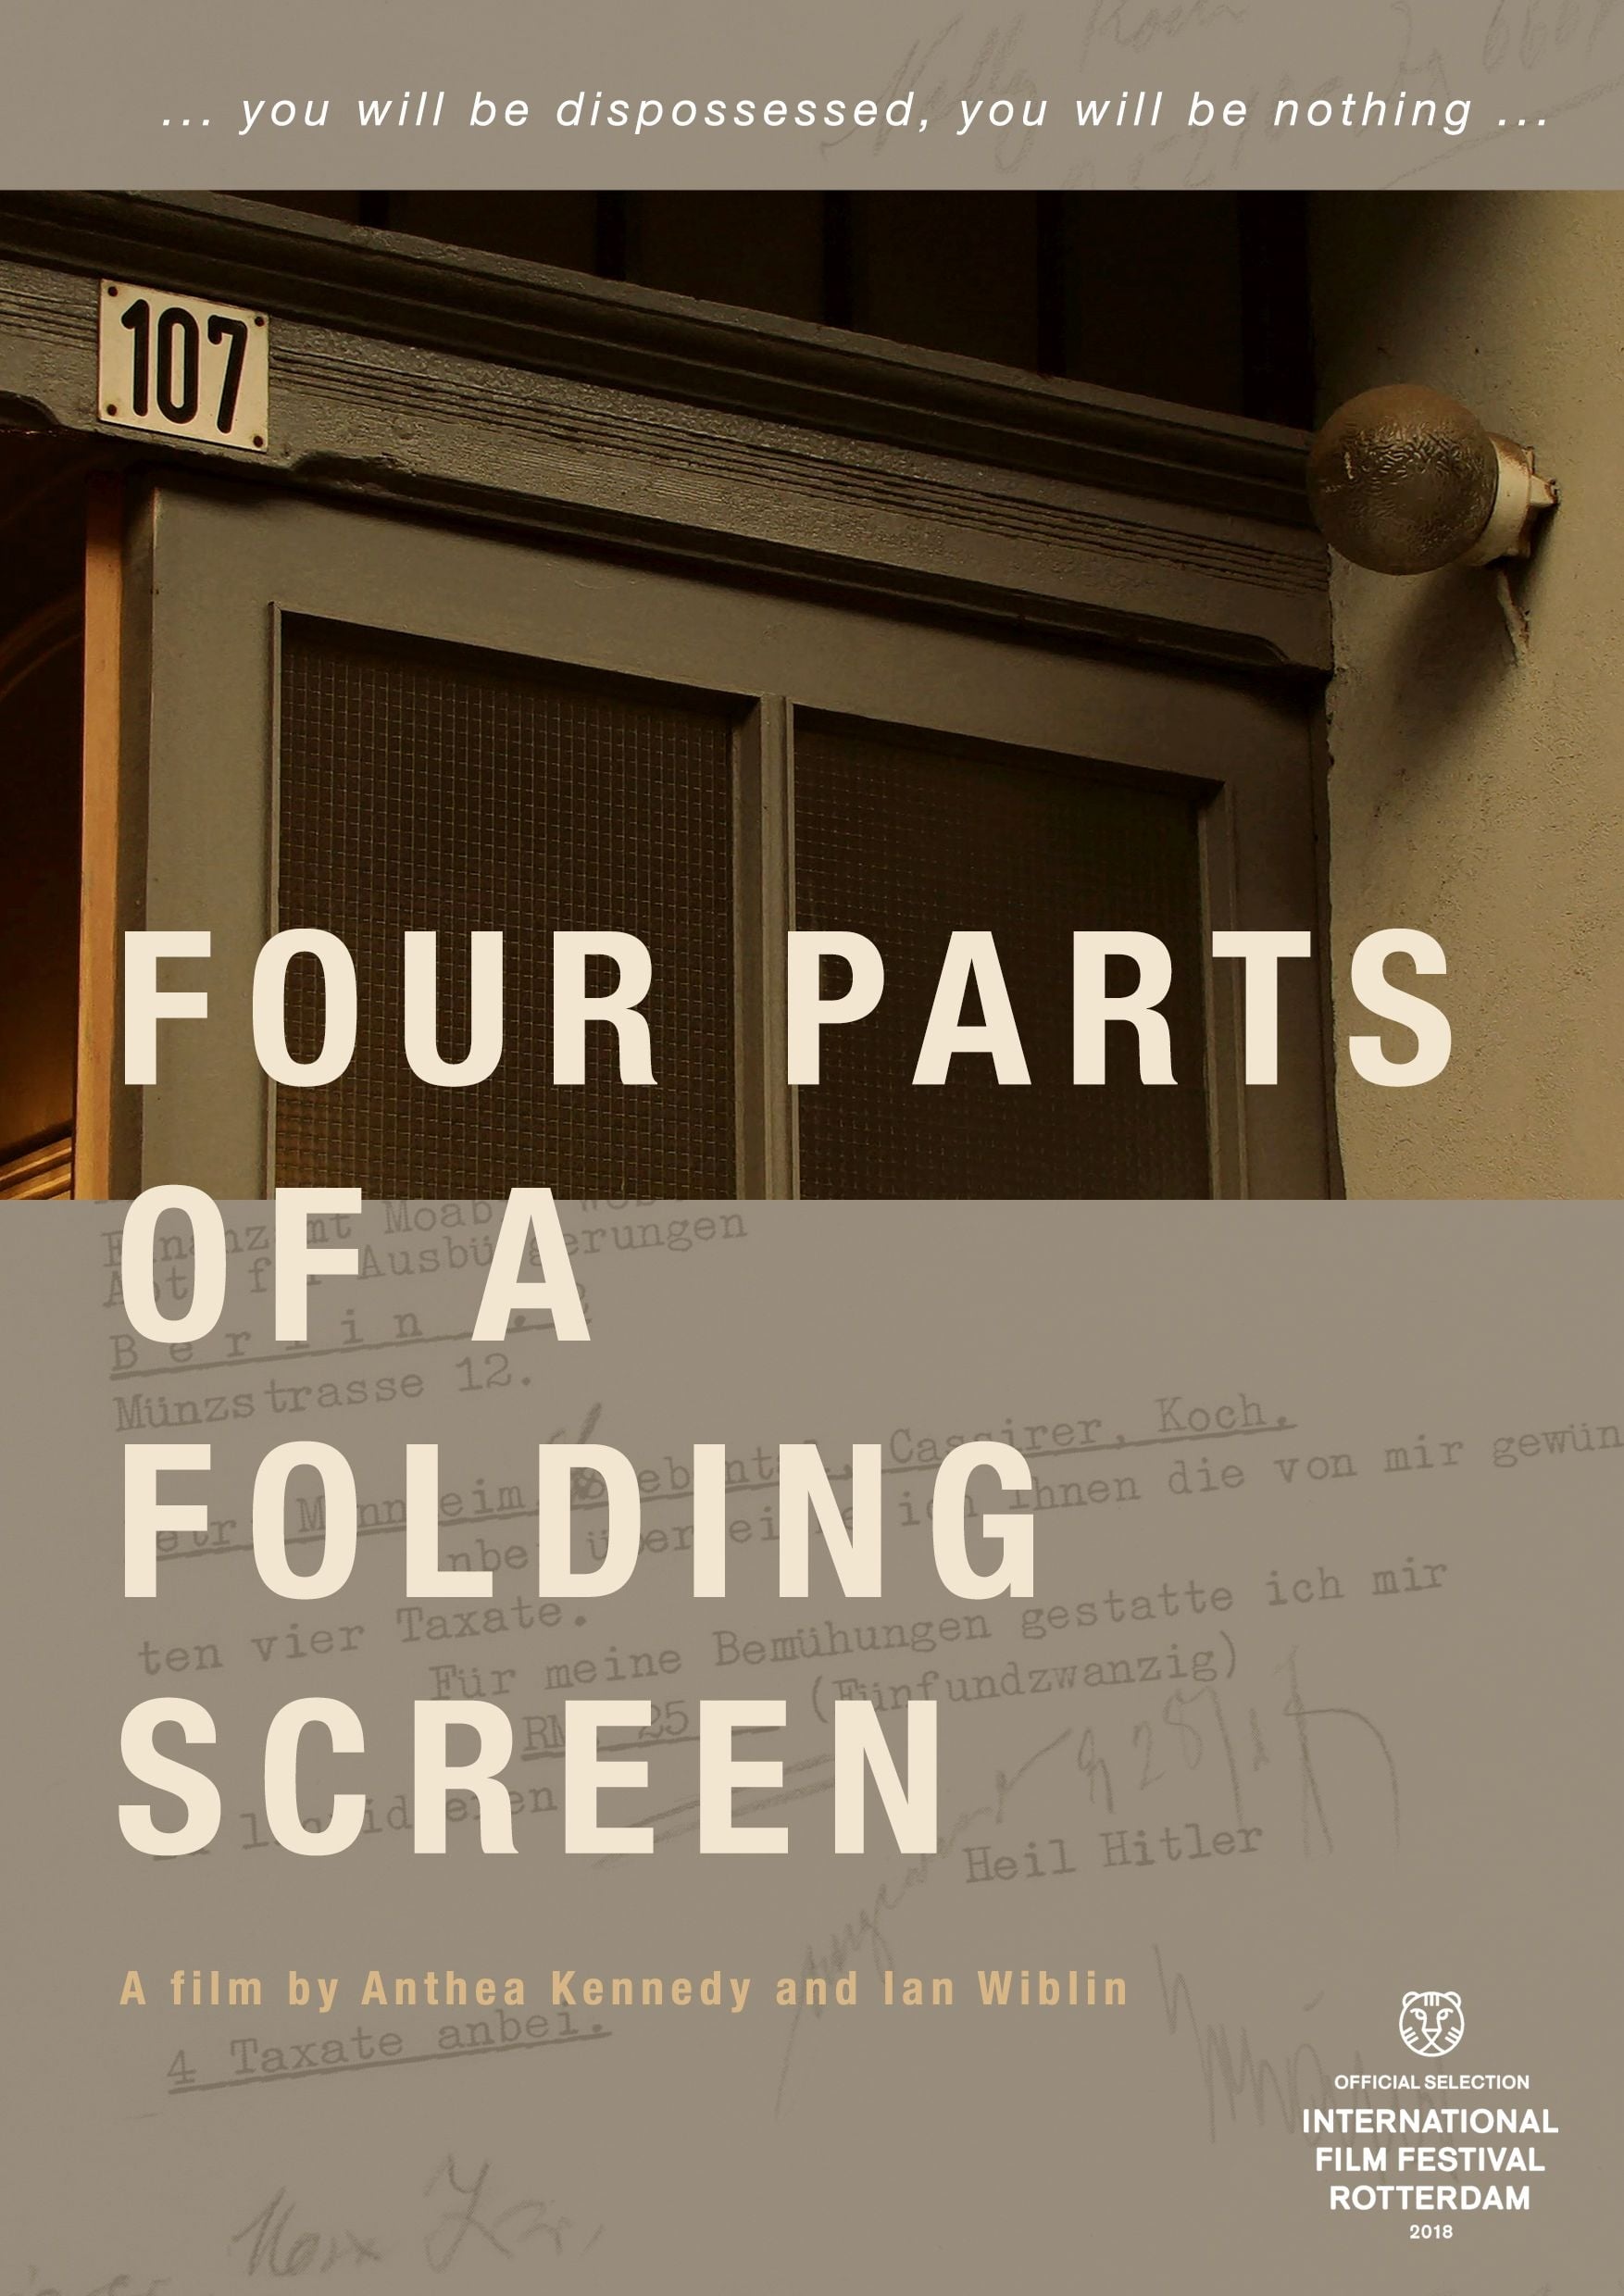 Four Parts of a Folding Screen